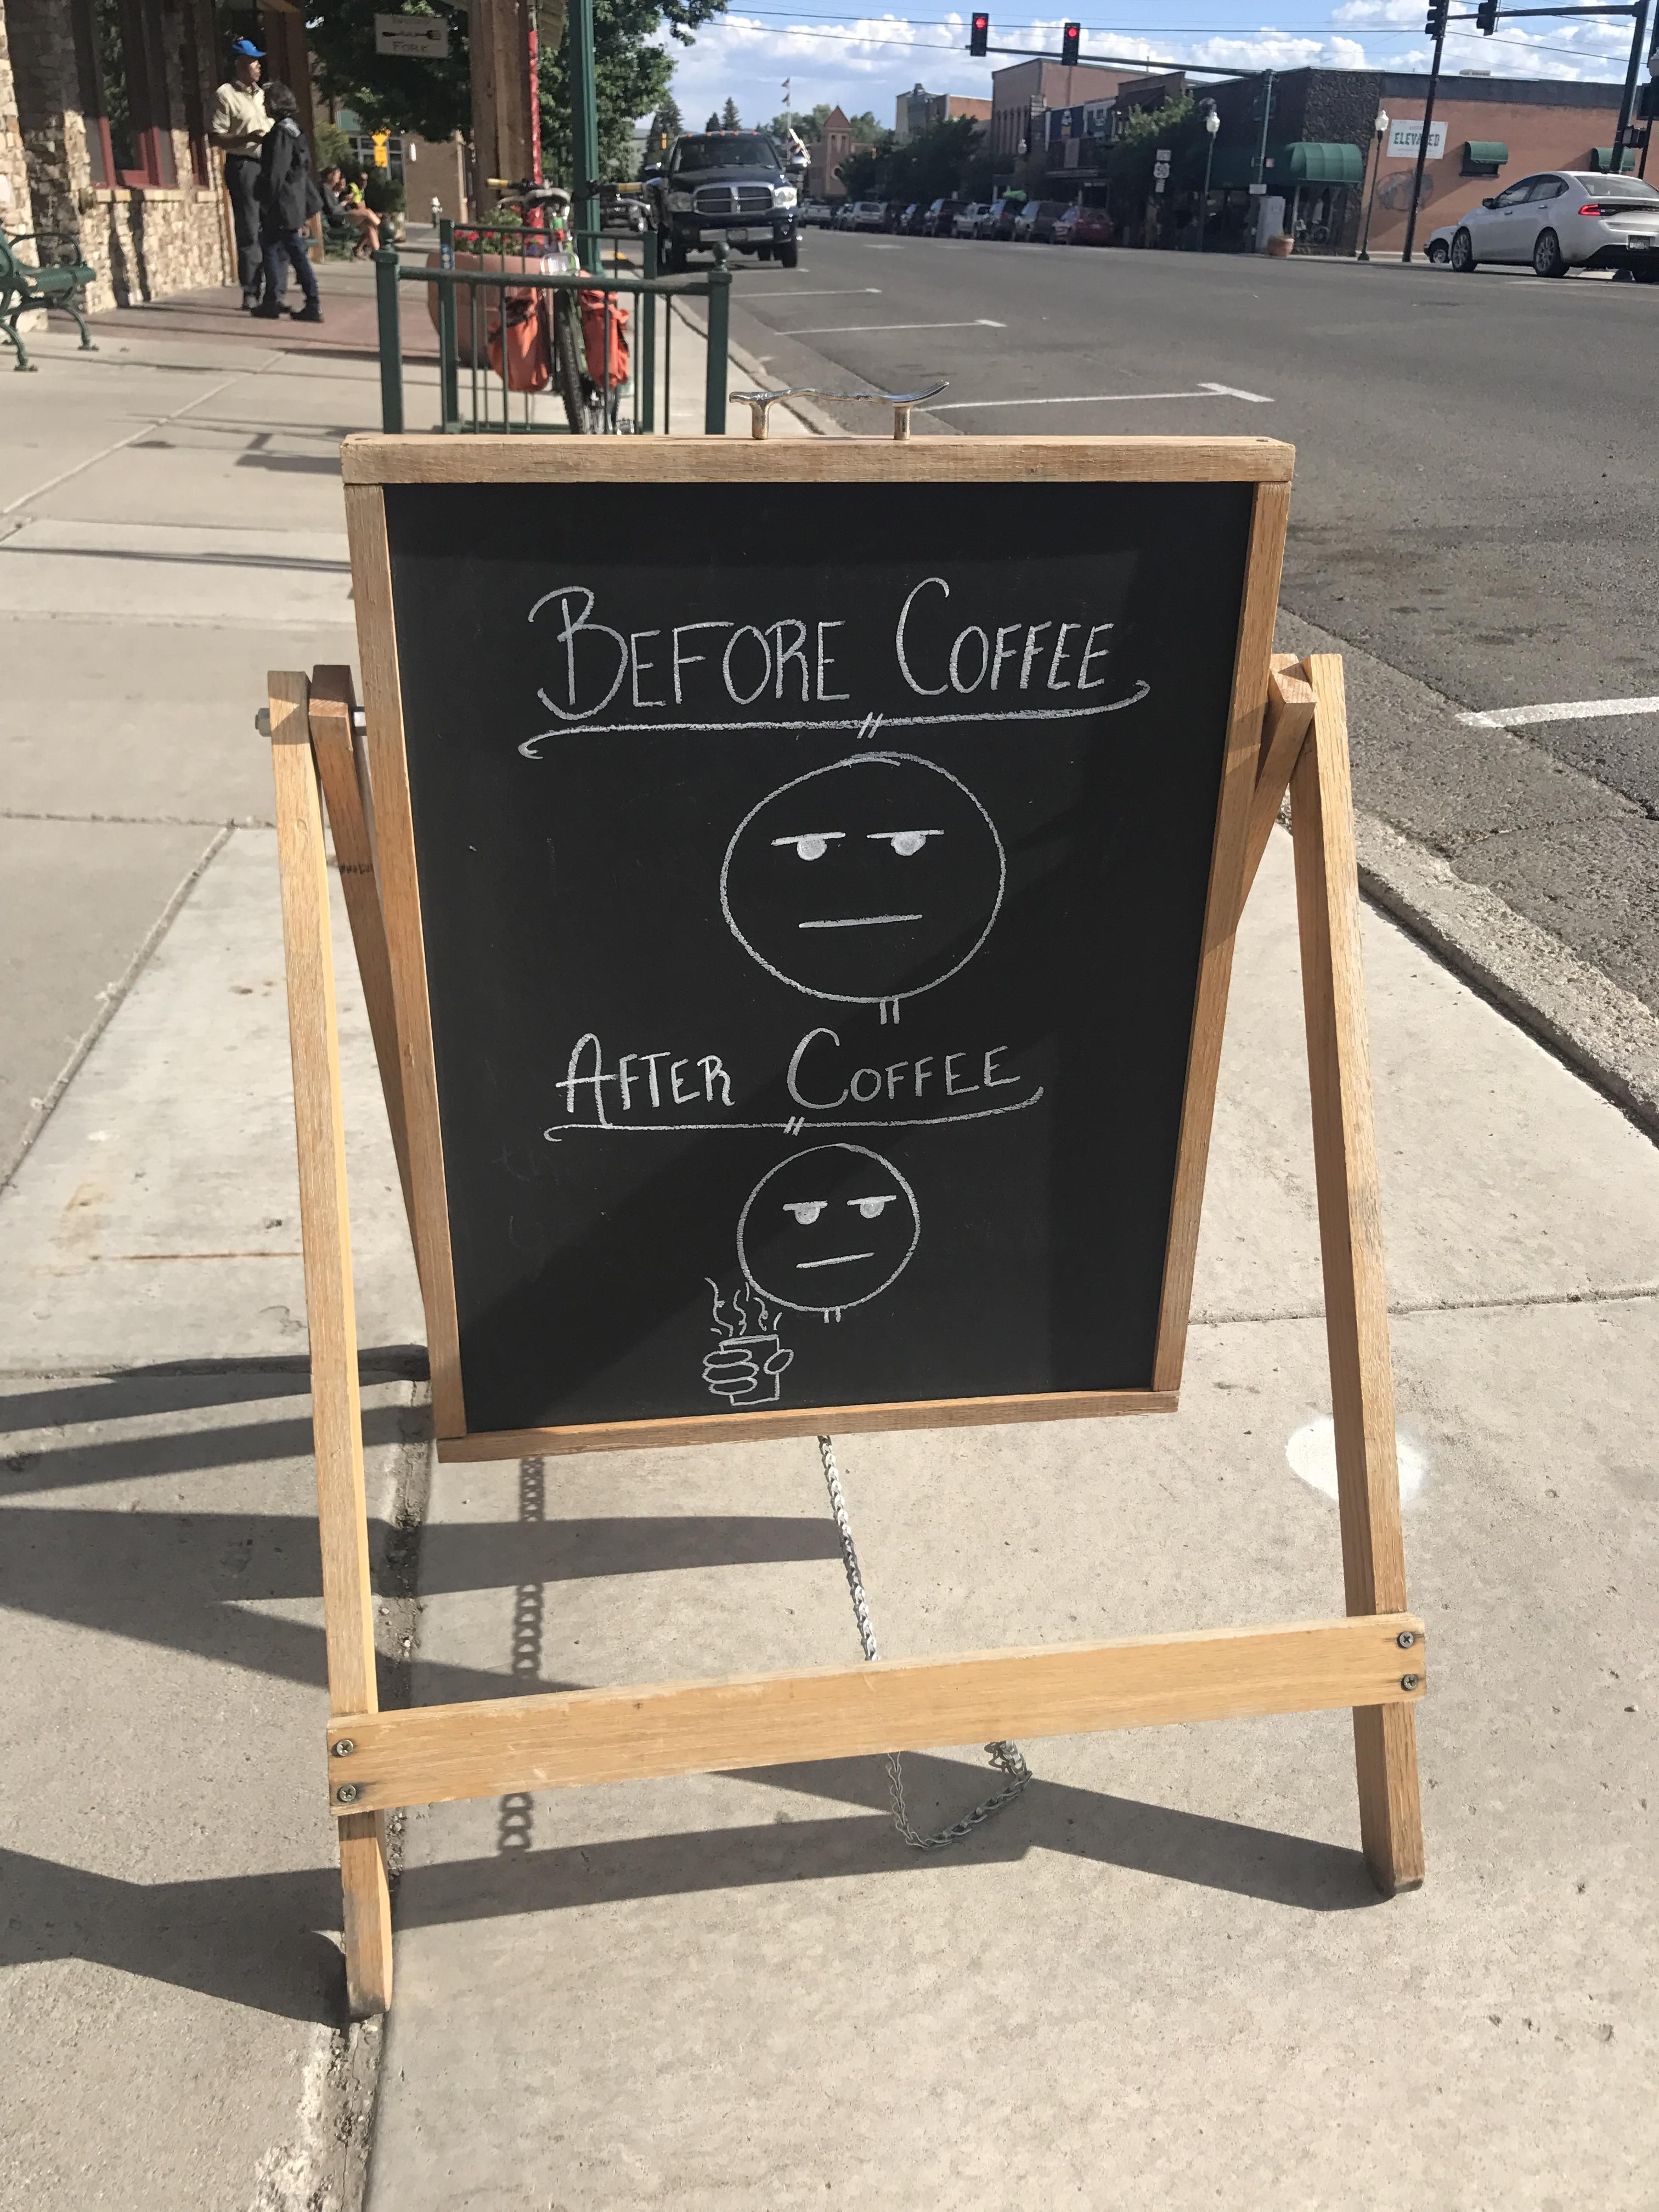 My coffee shop knows what's up